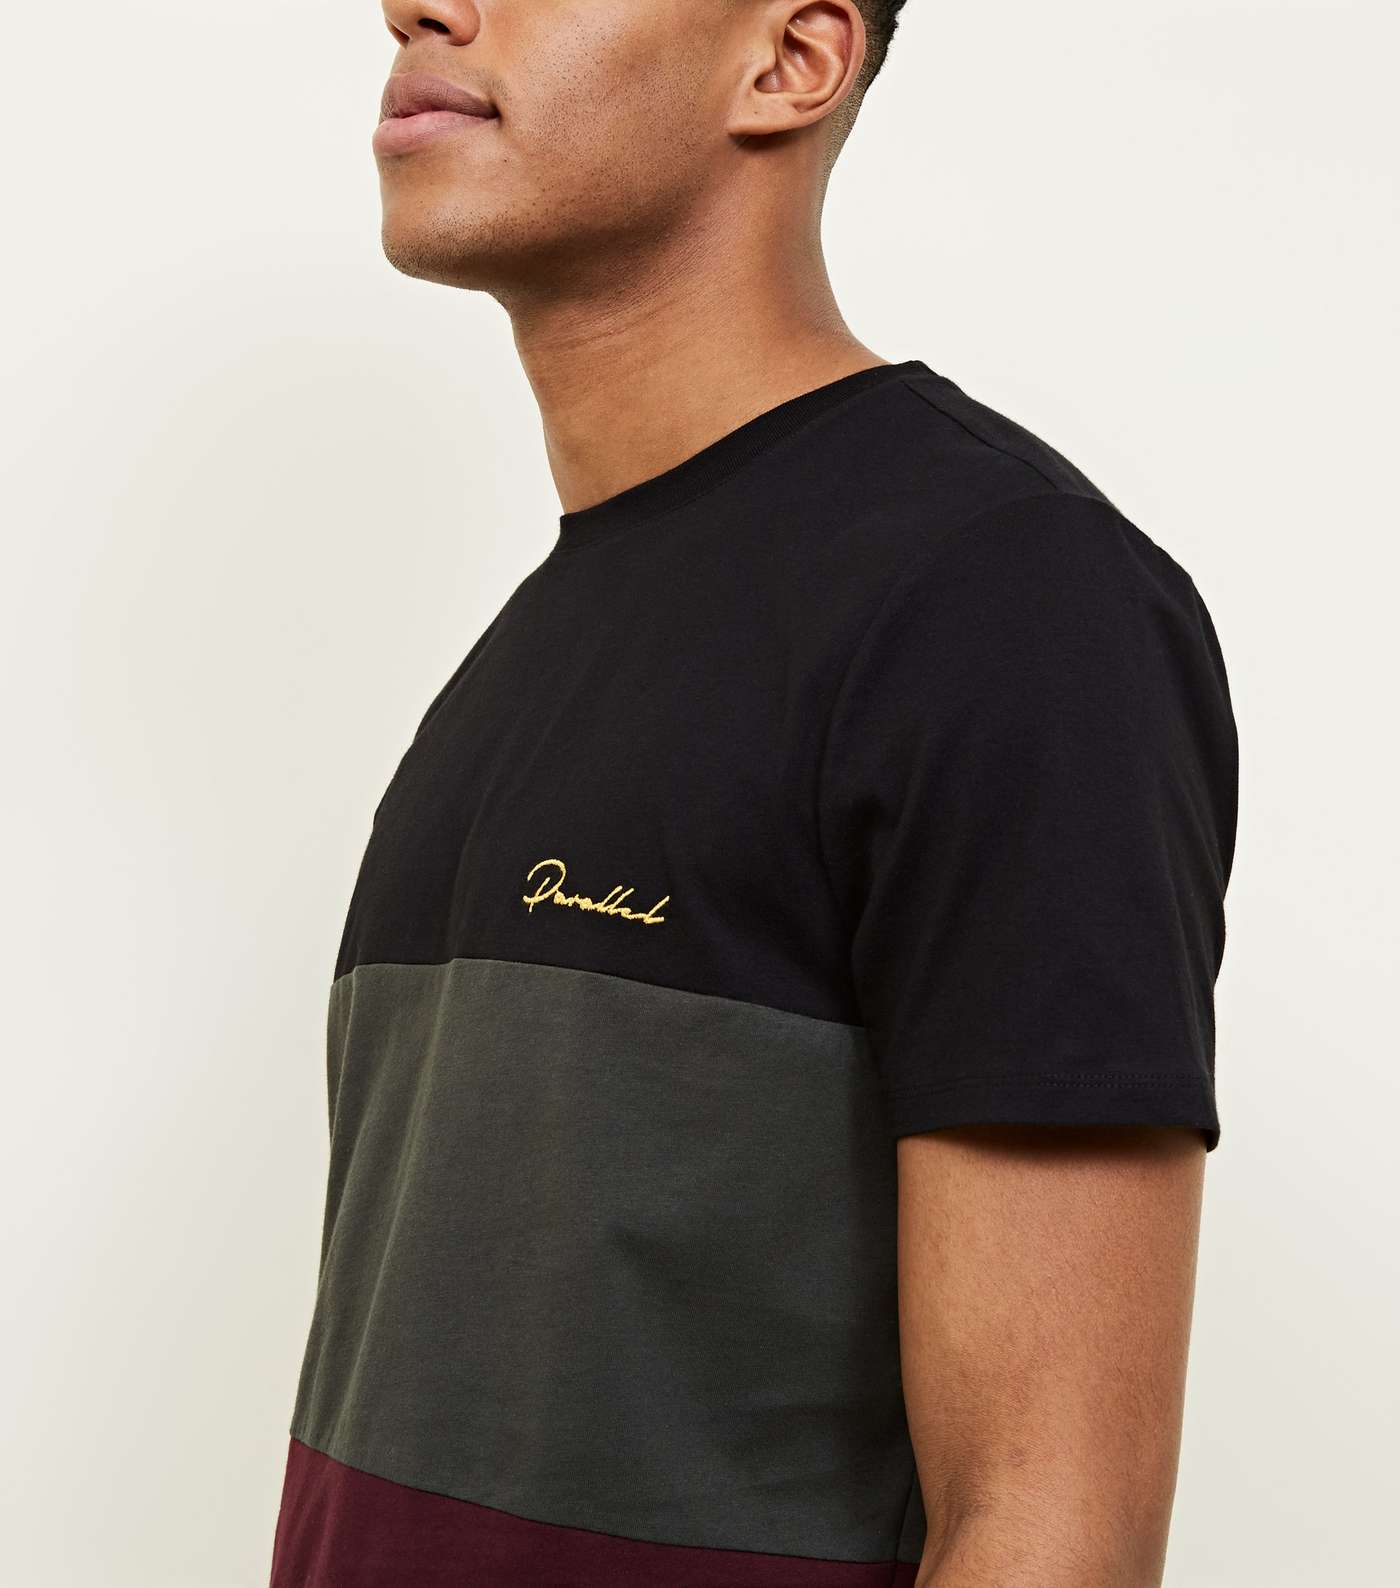 Burgundy Colour Block Parallel Embroidered T-Shirt Image 5